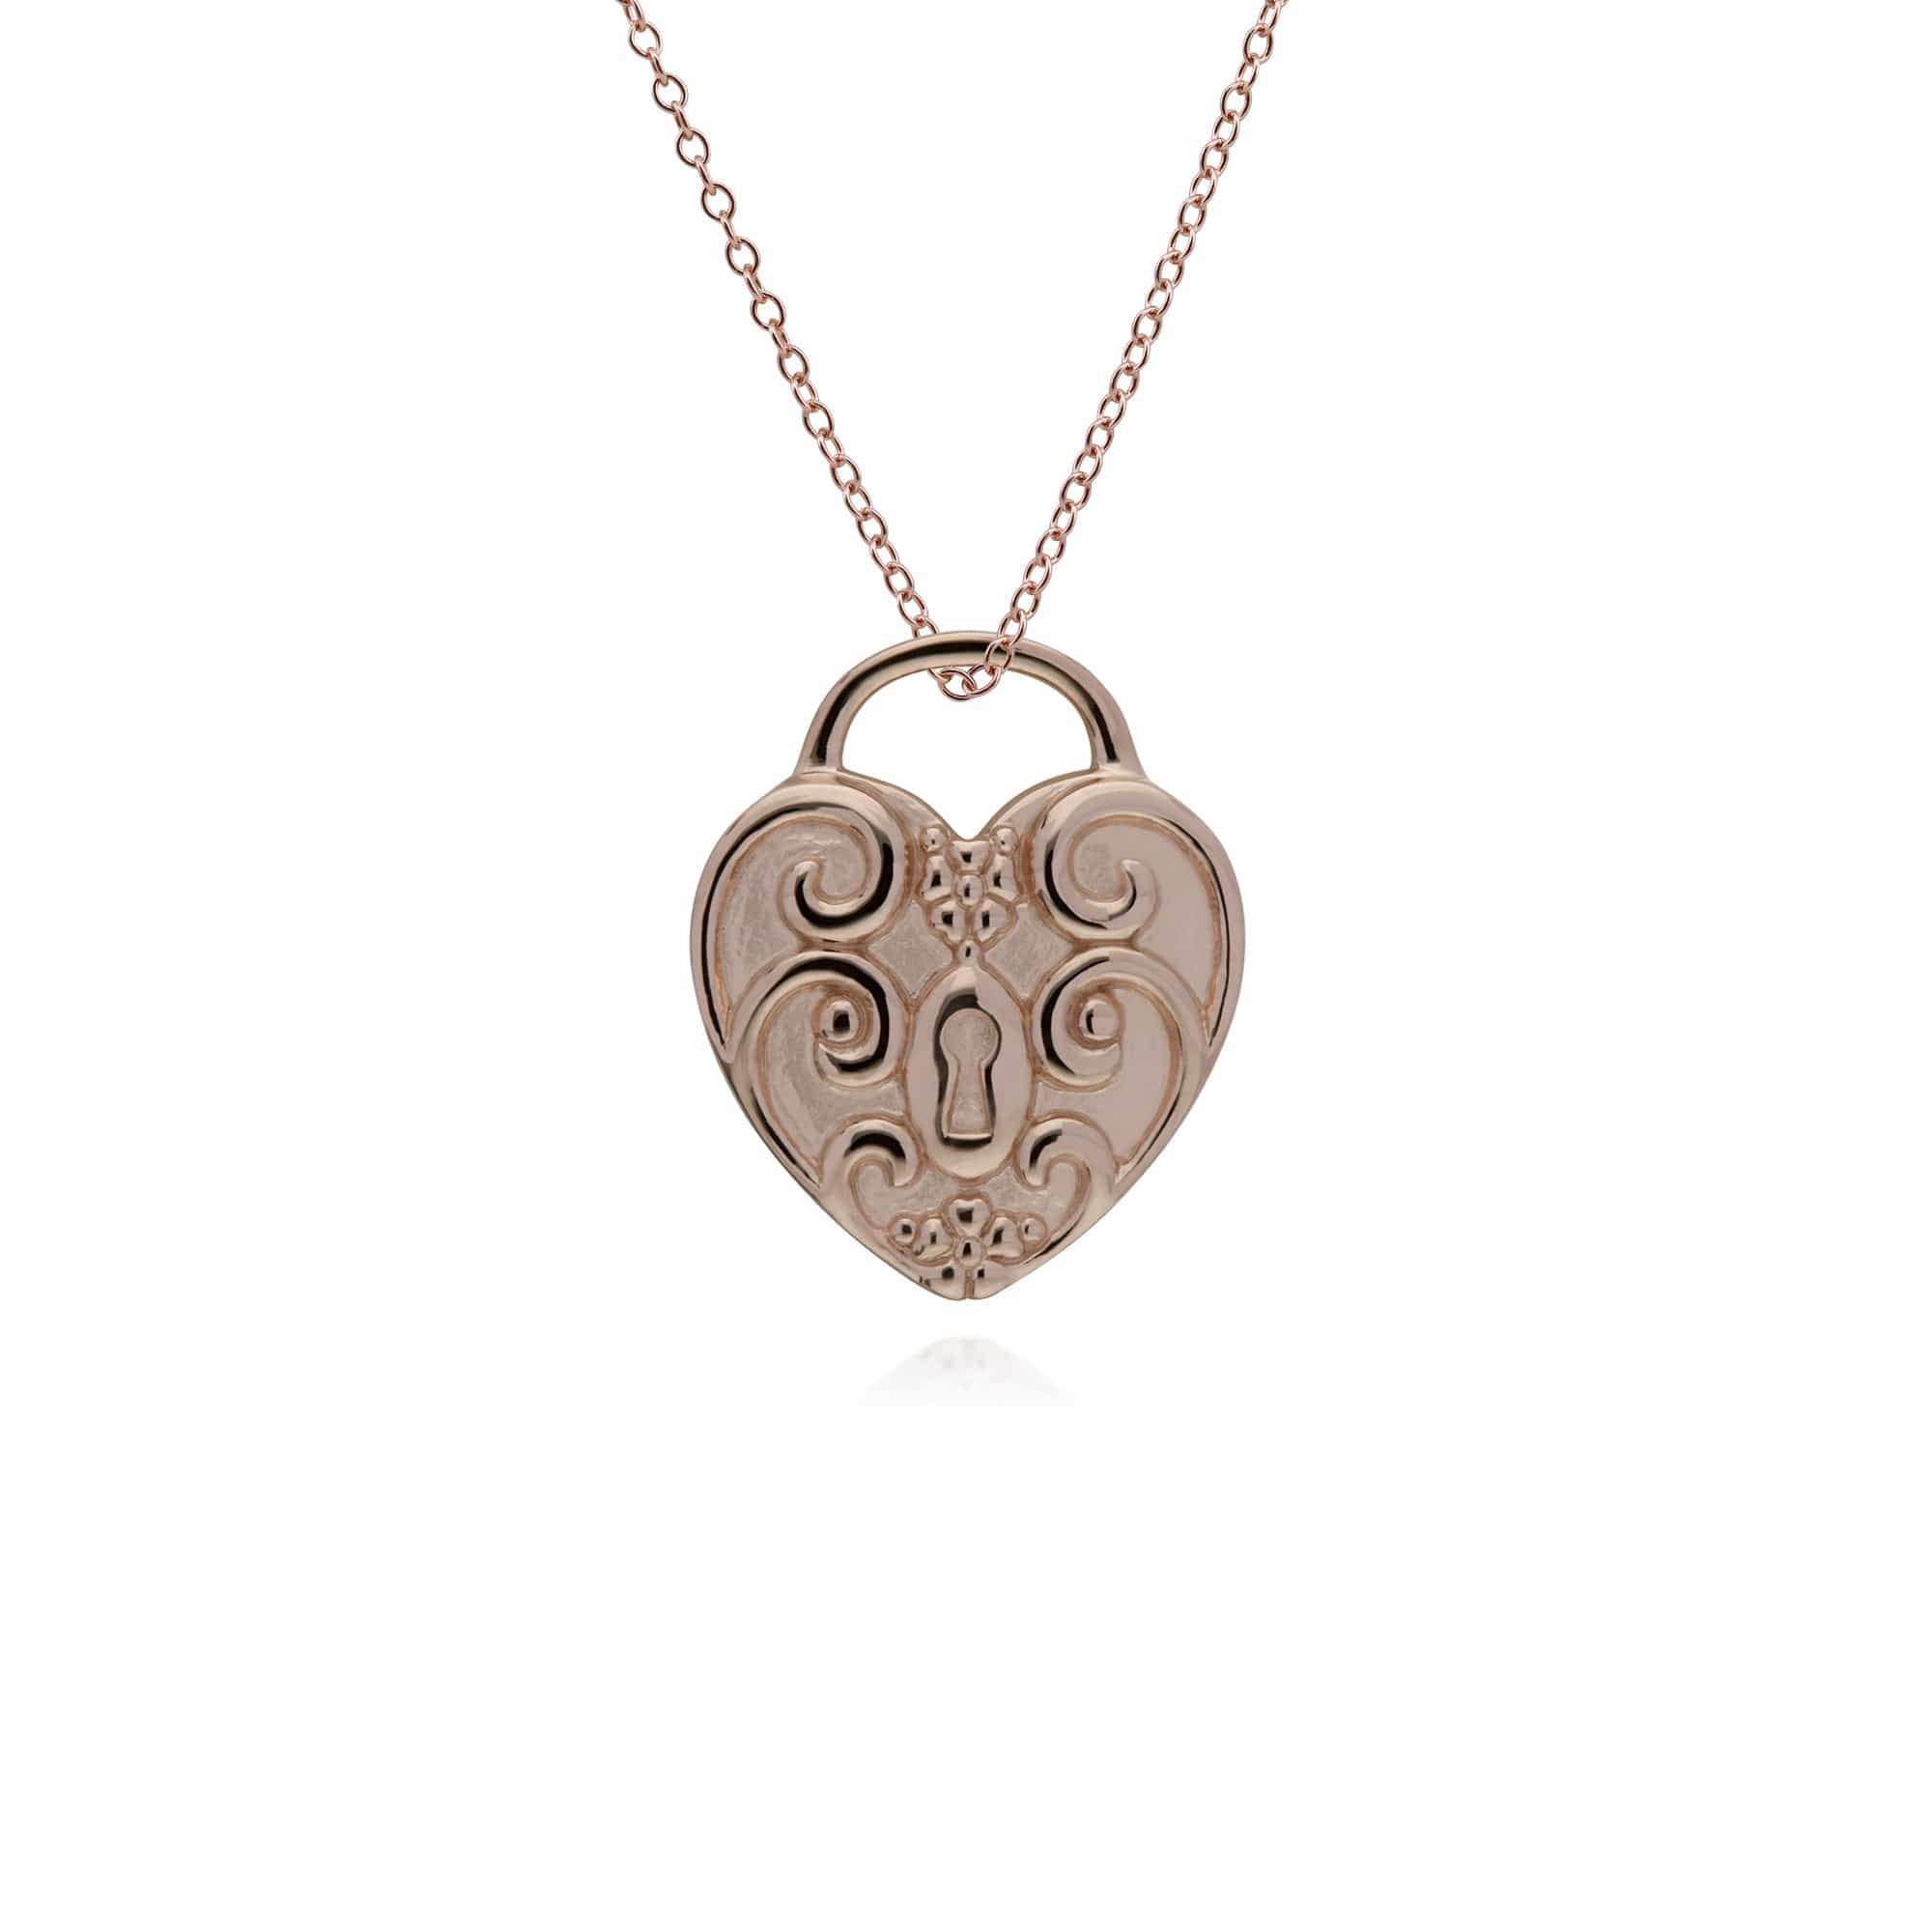 270P025904925-270P026501925 Classic Swirl Heart Lock Pendant & Jade Charm in Rose Gold Plated 925 Sterling Silver 3